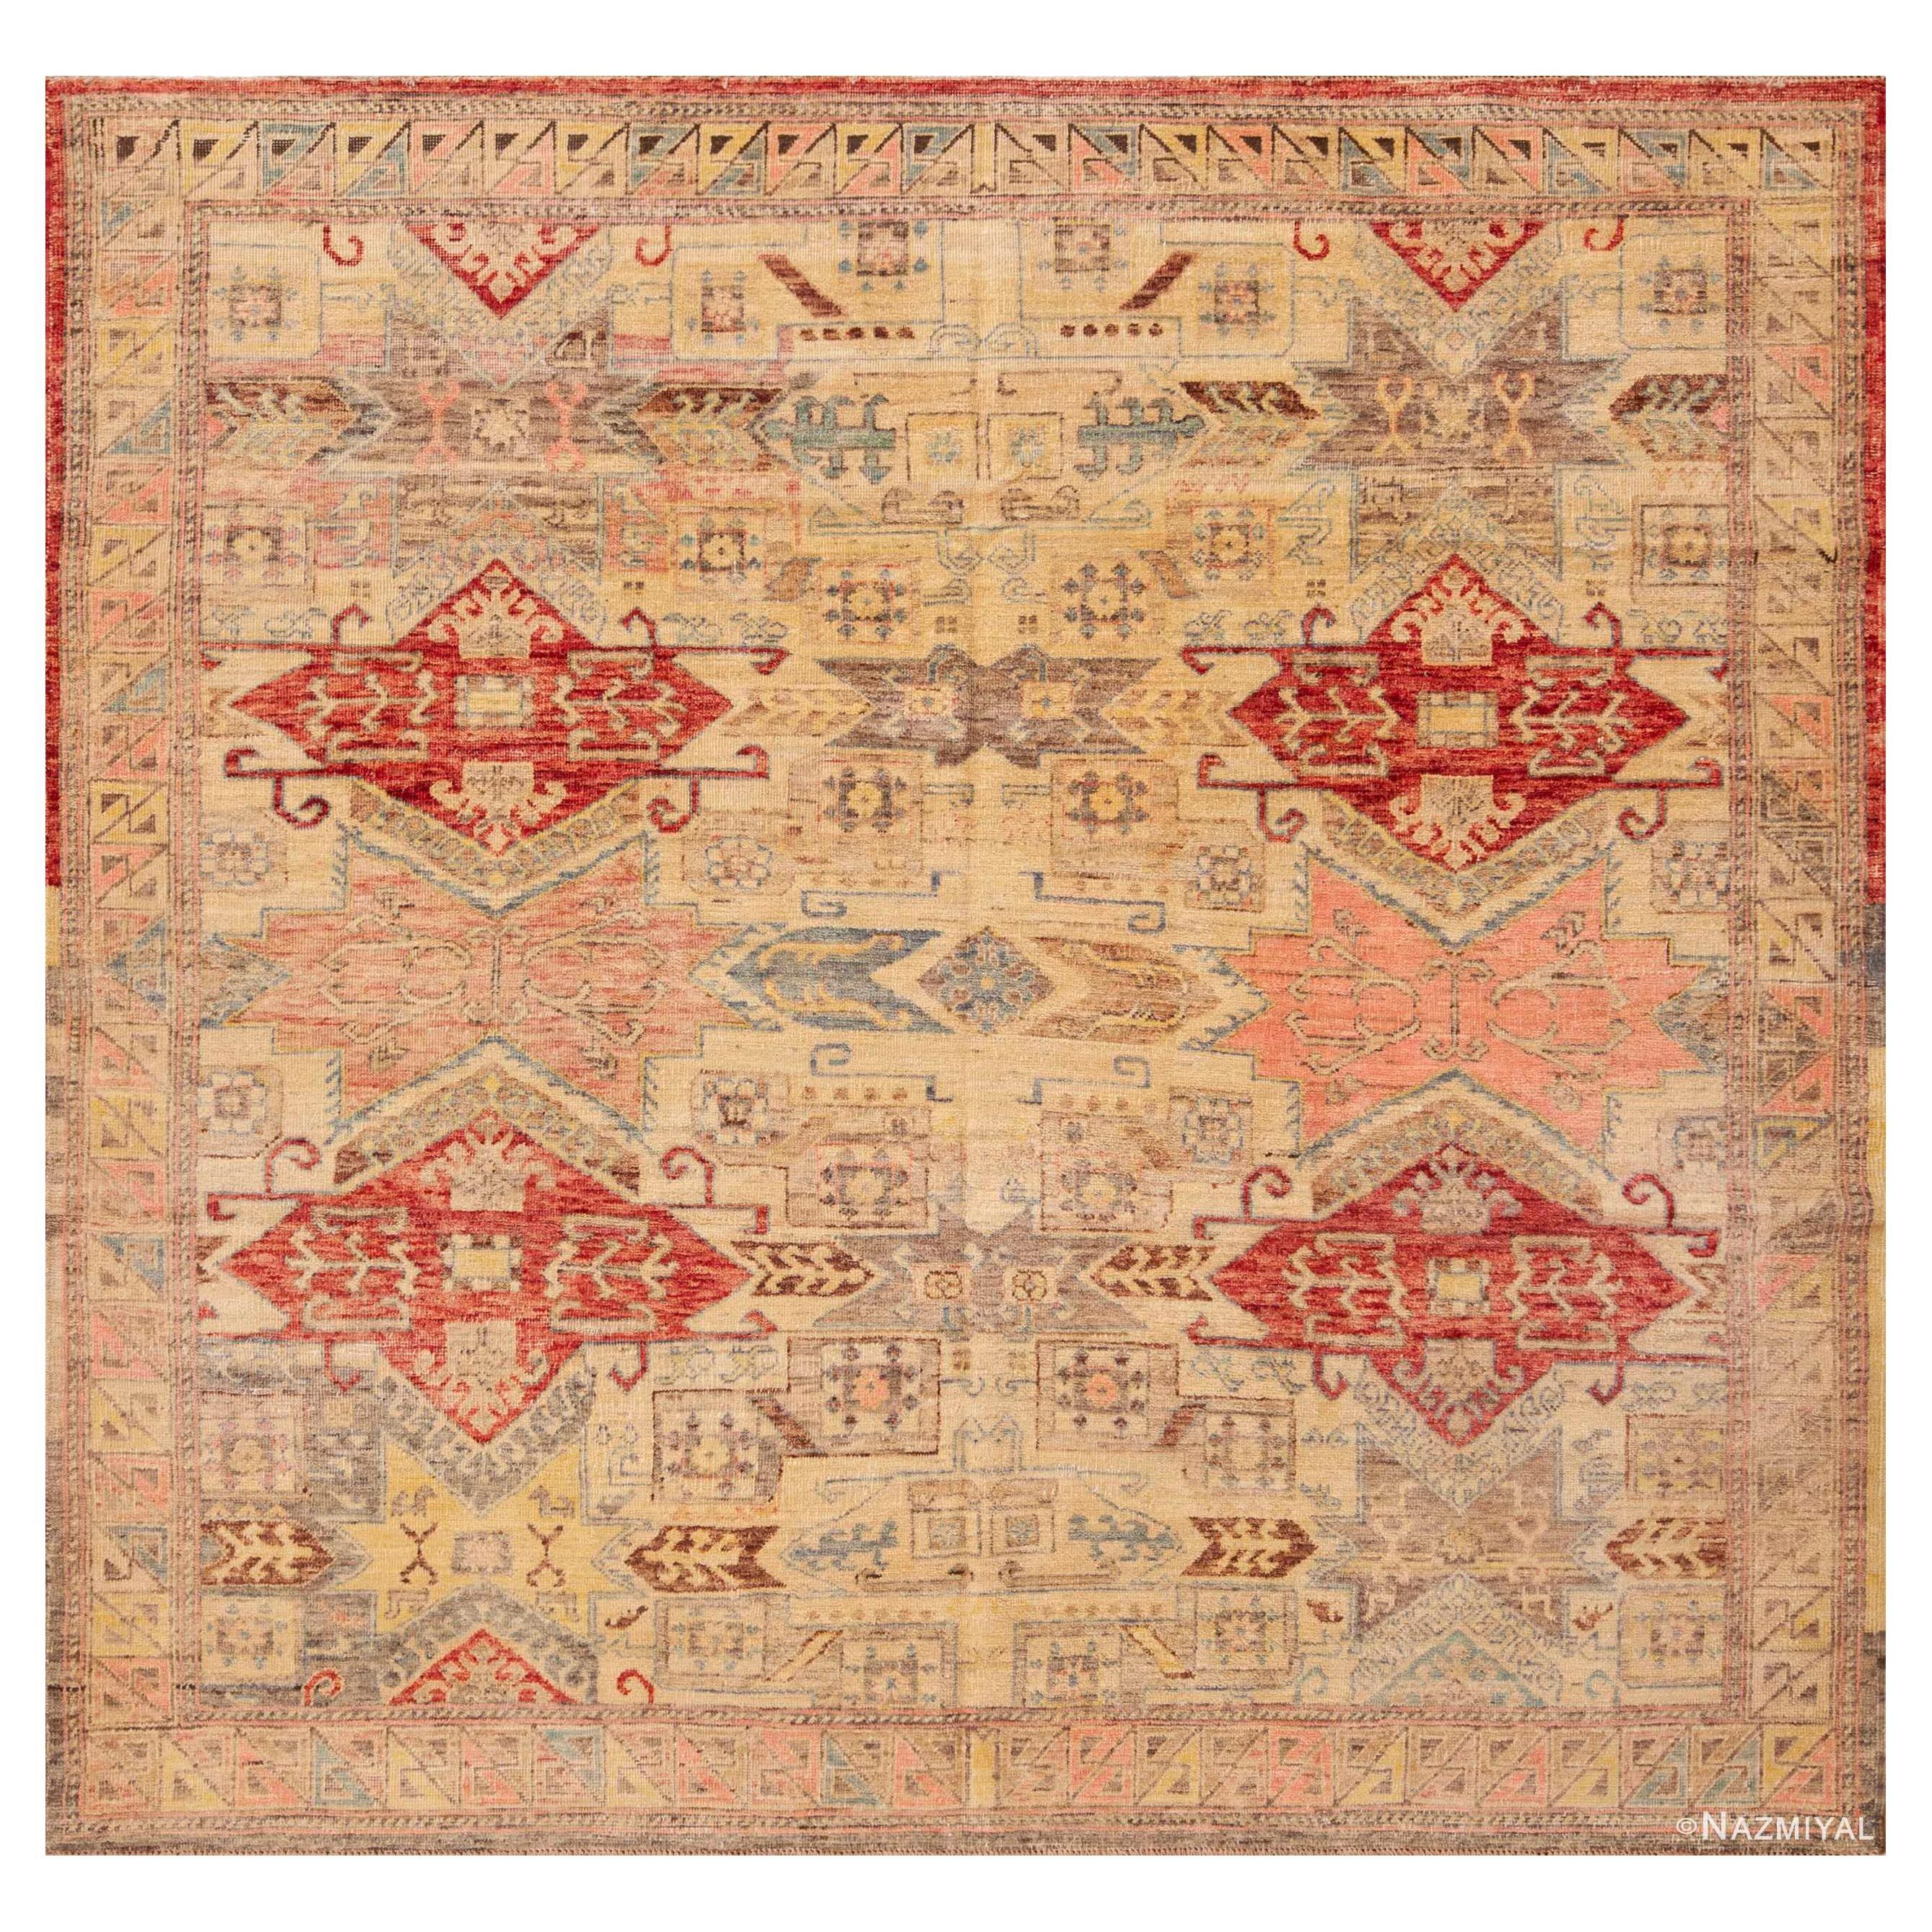 Nazmiyal Collection Small Square Size Tribal Modern Area Rug 6'6" x 6'9" For Sale